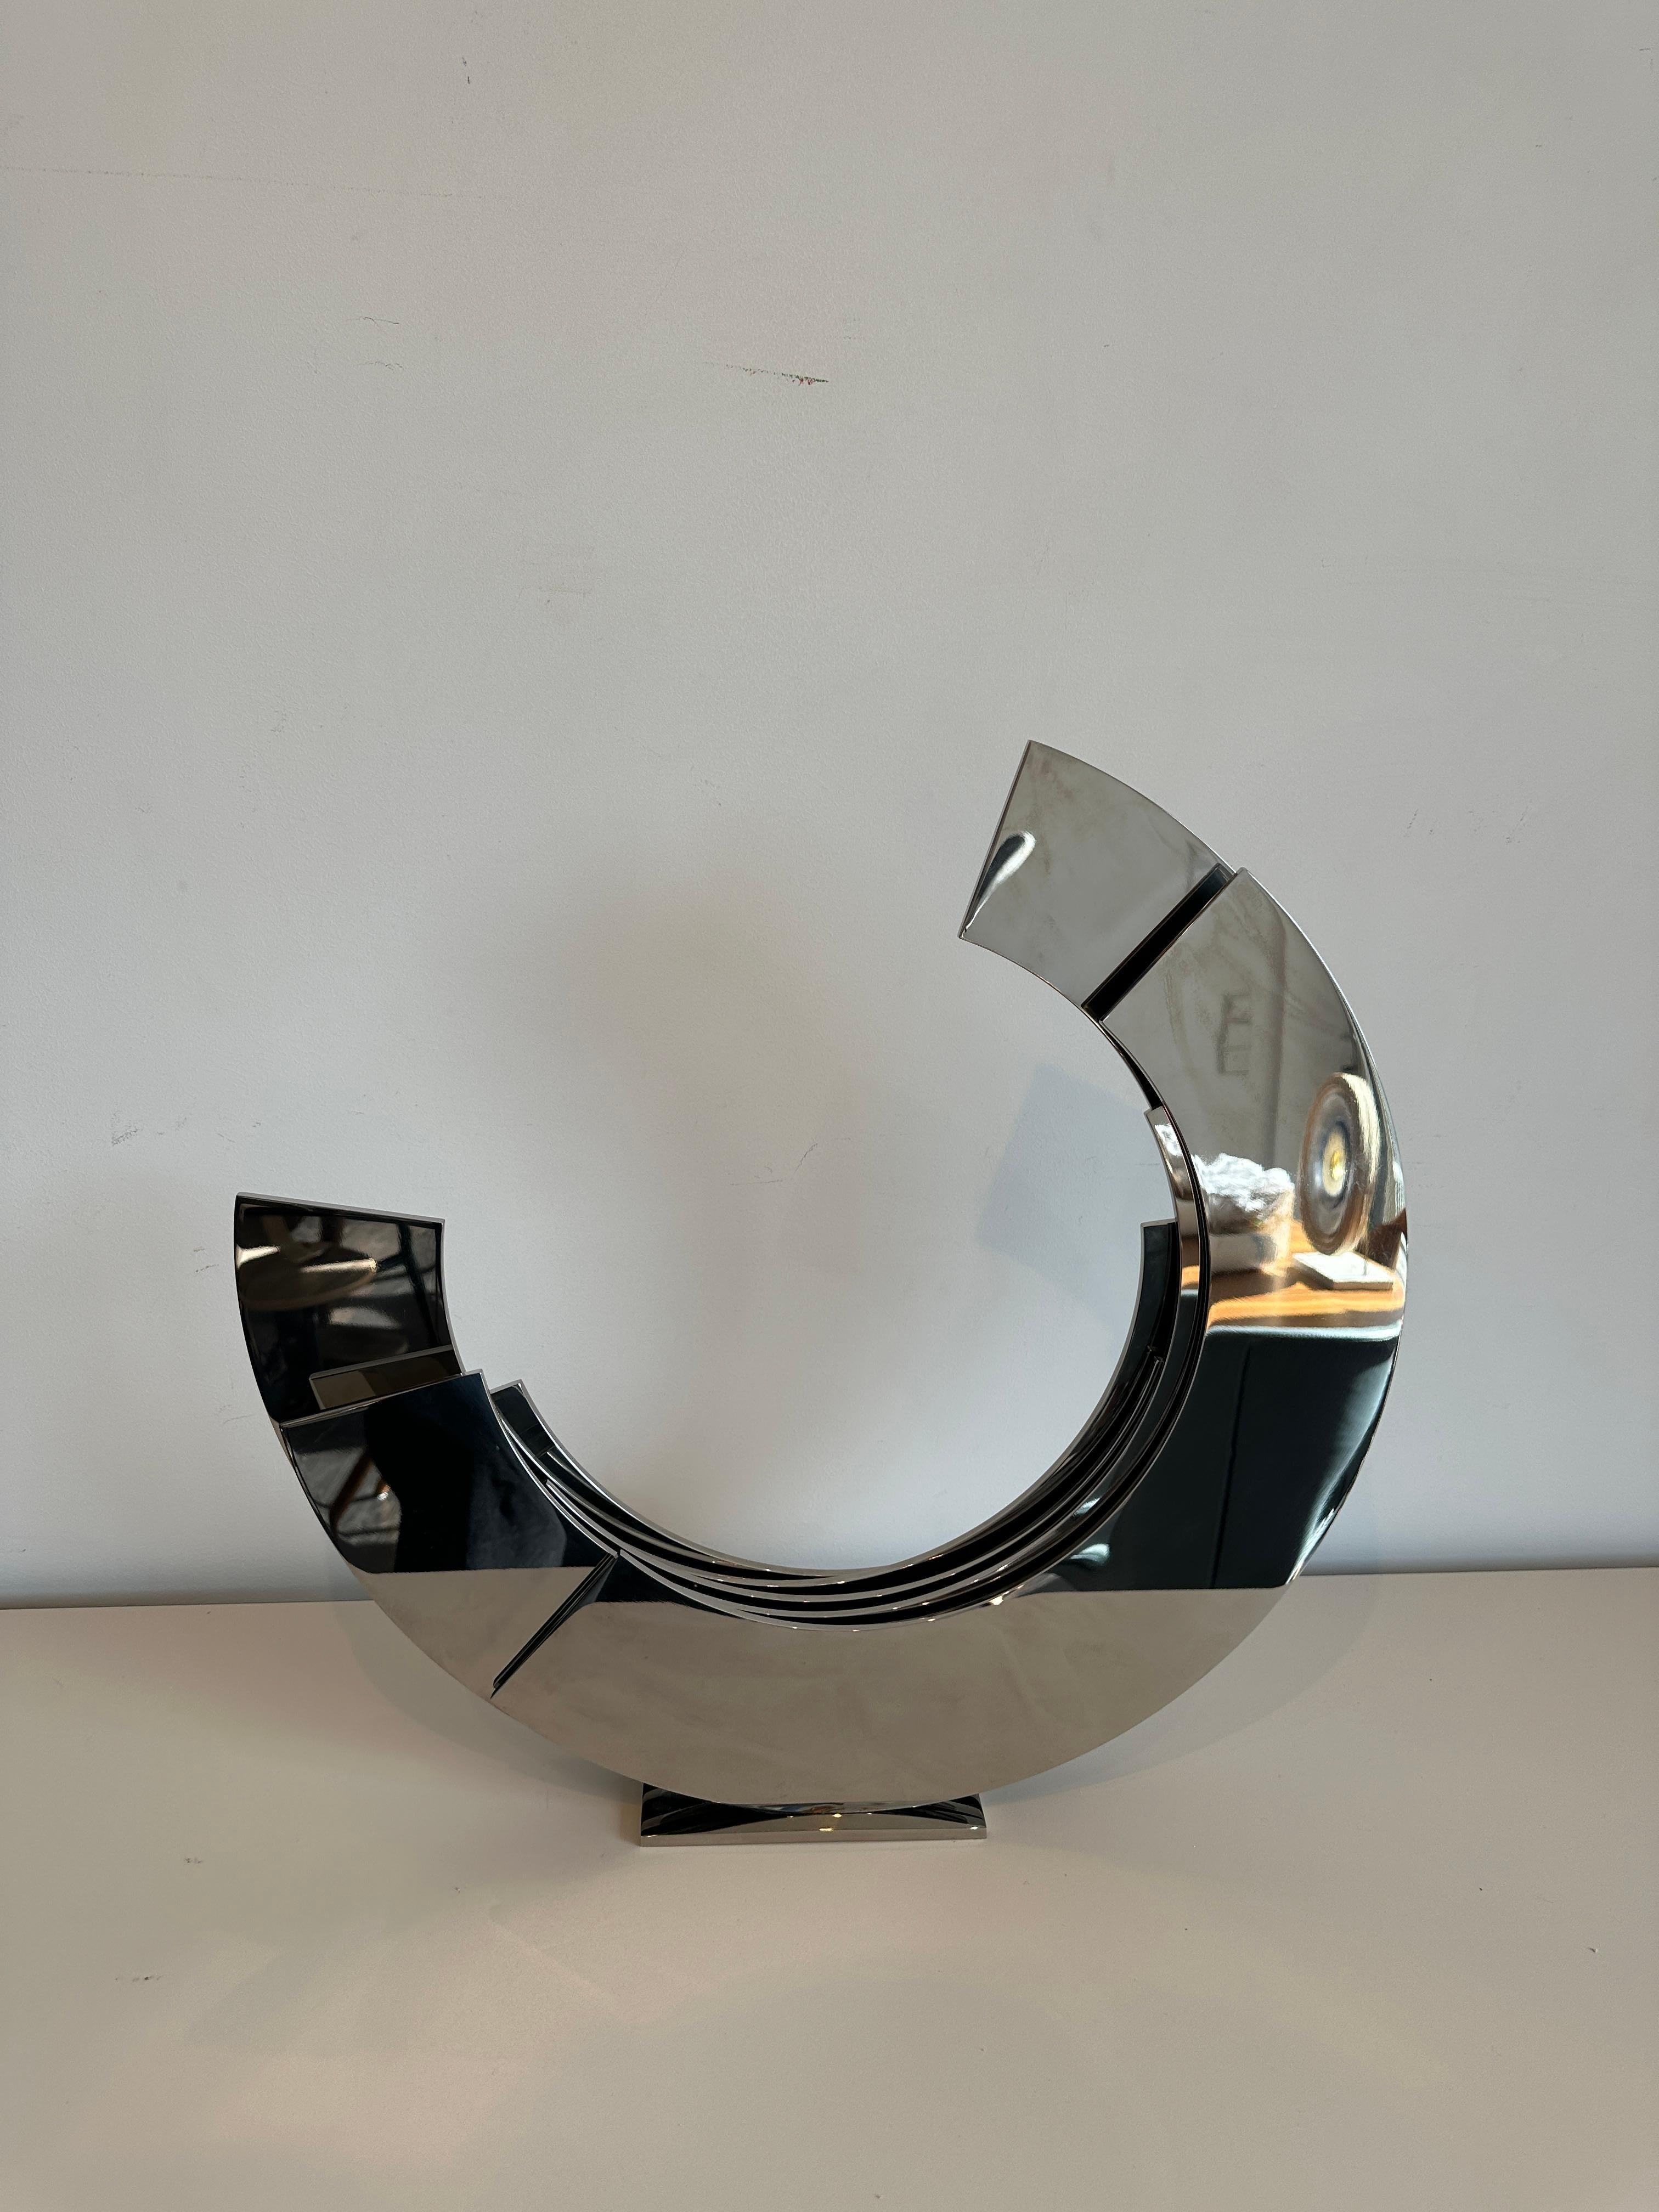 Contemporary Minimal Silver polished stainless steel sculpture. It is a stunning polished stainless steel and makes for an elegant statement in any garden, lobby or private home.

Kuno Vollet is a sculptor working with different materials such as